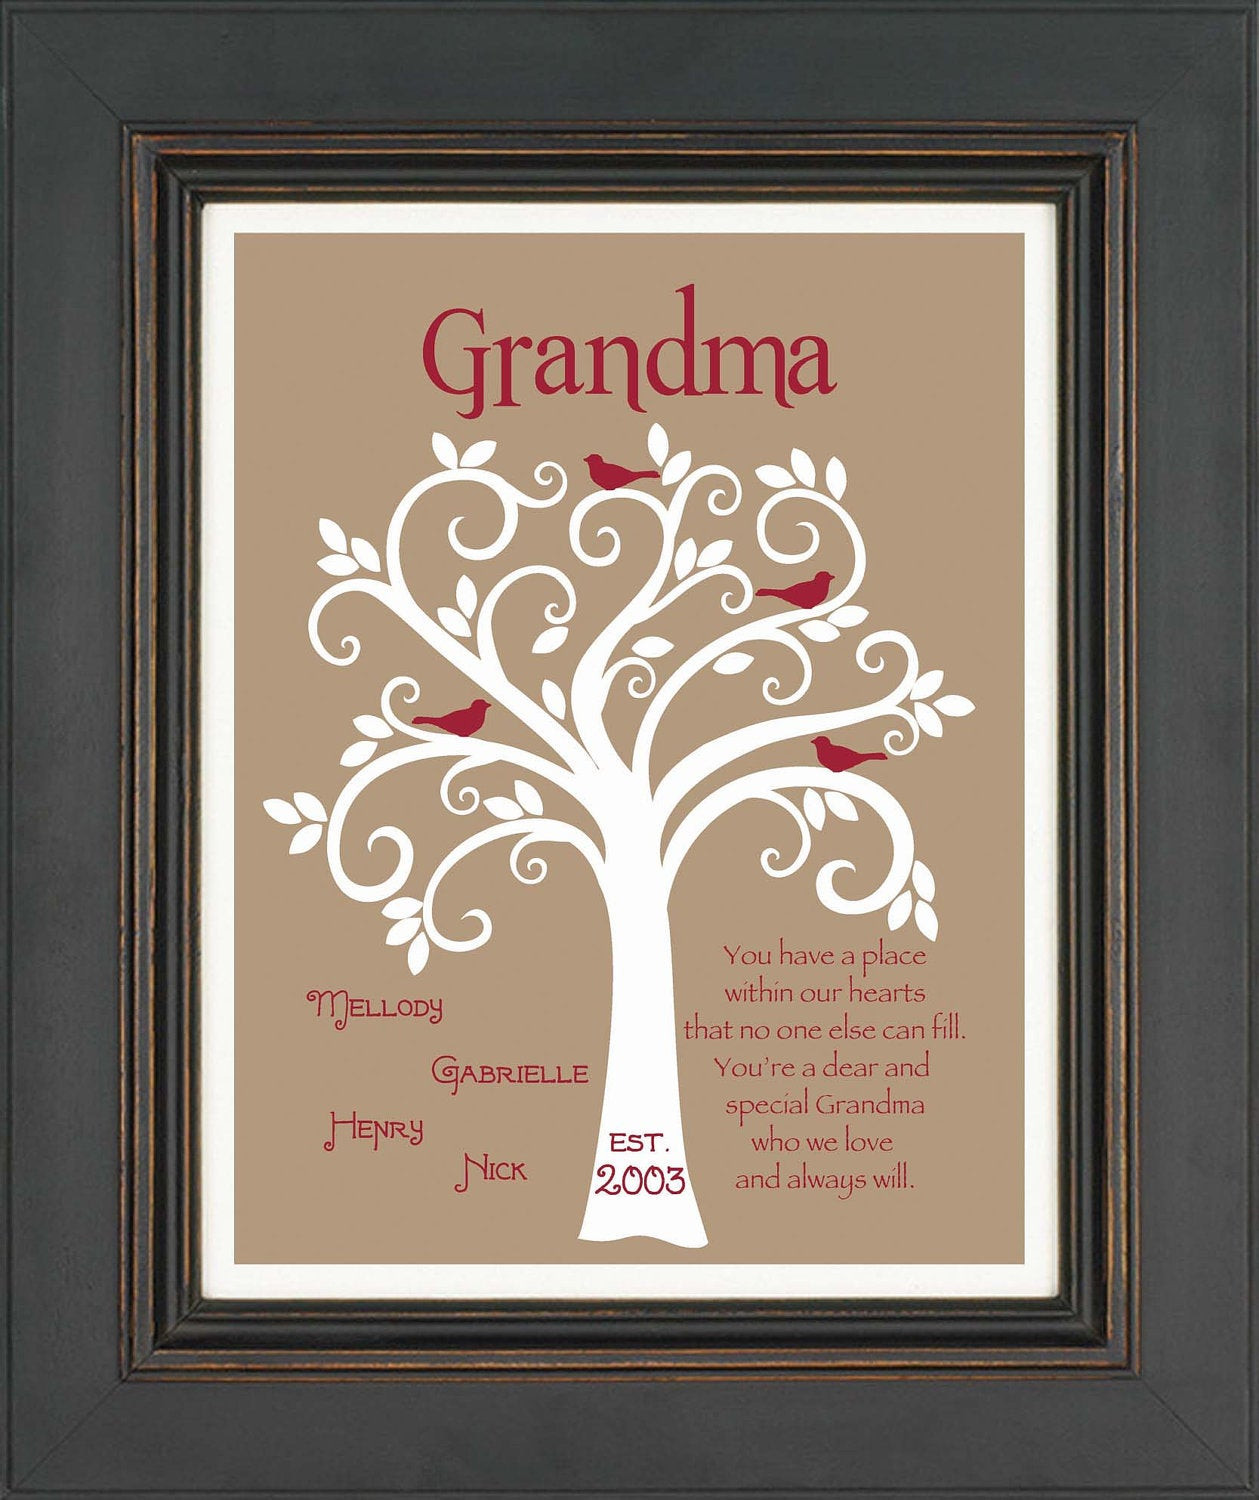 Gift Ideas For A Grandmother
 Grandma Gift Family Tree 8x10 Custom Print Personalized